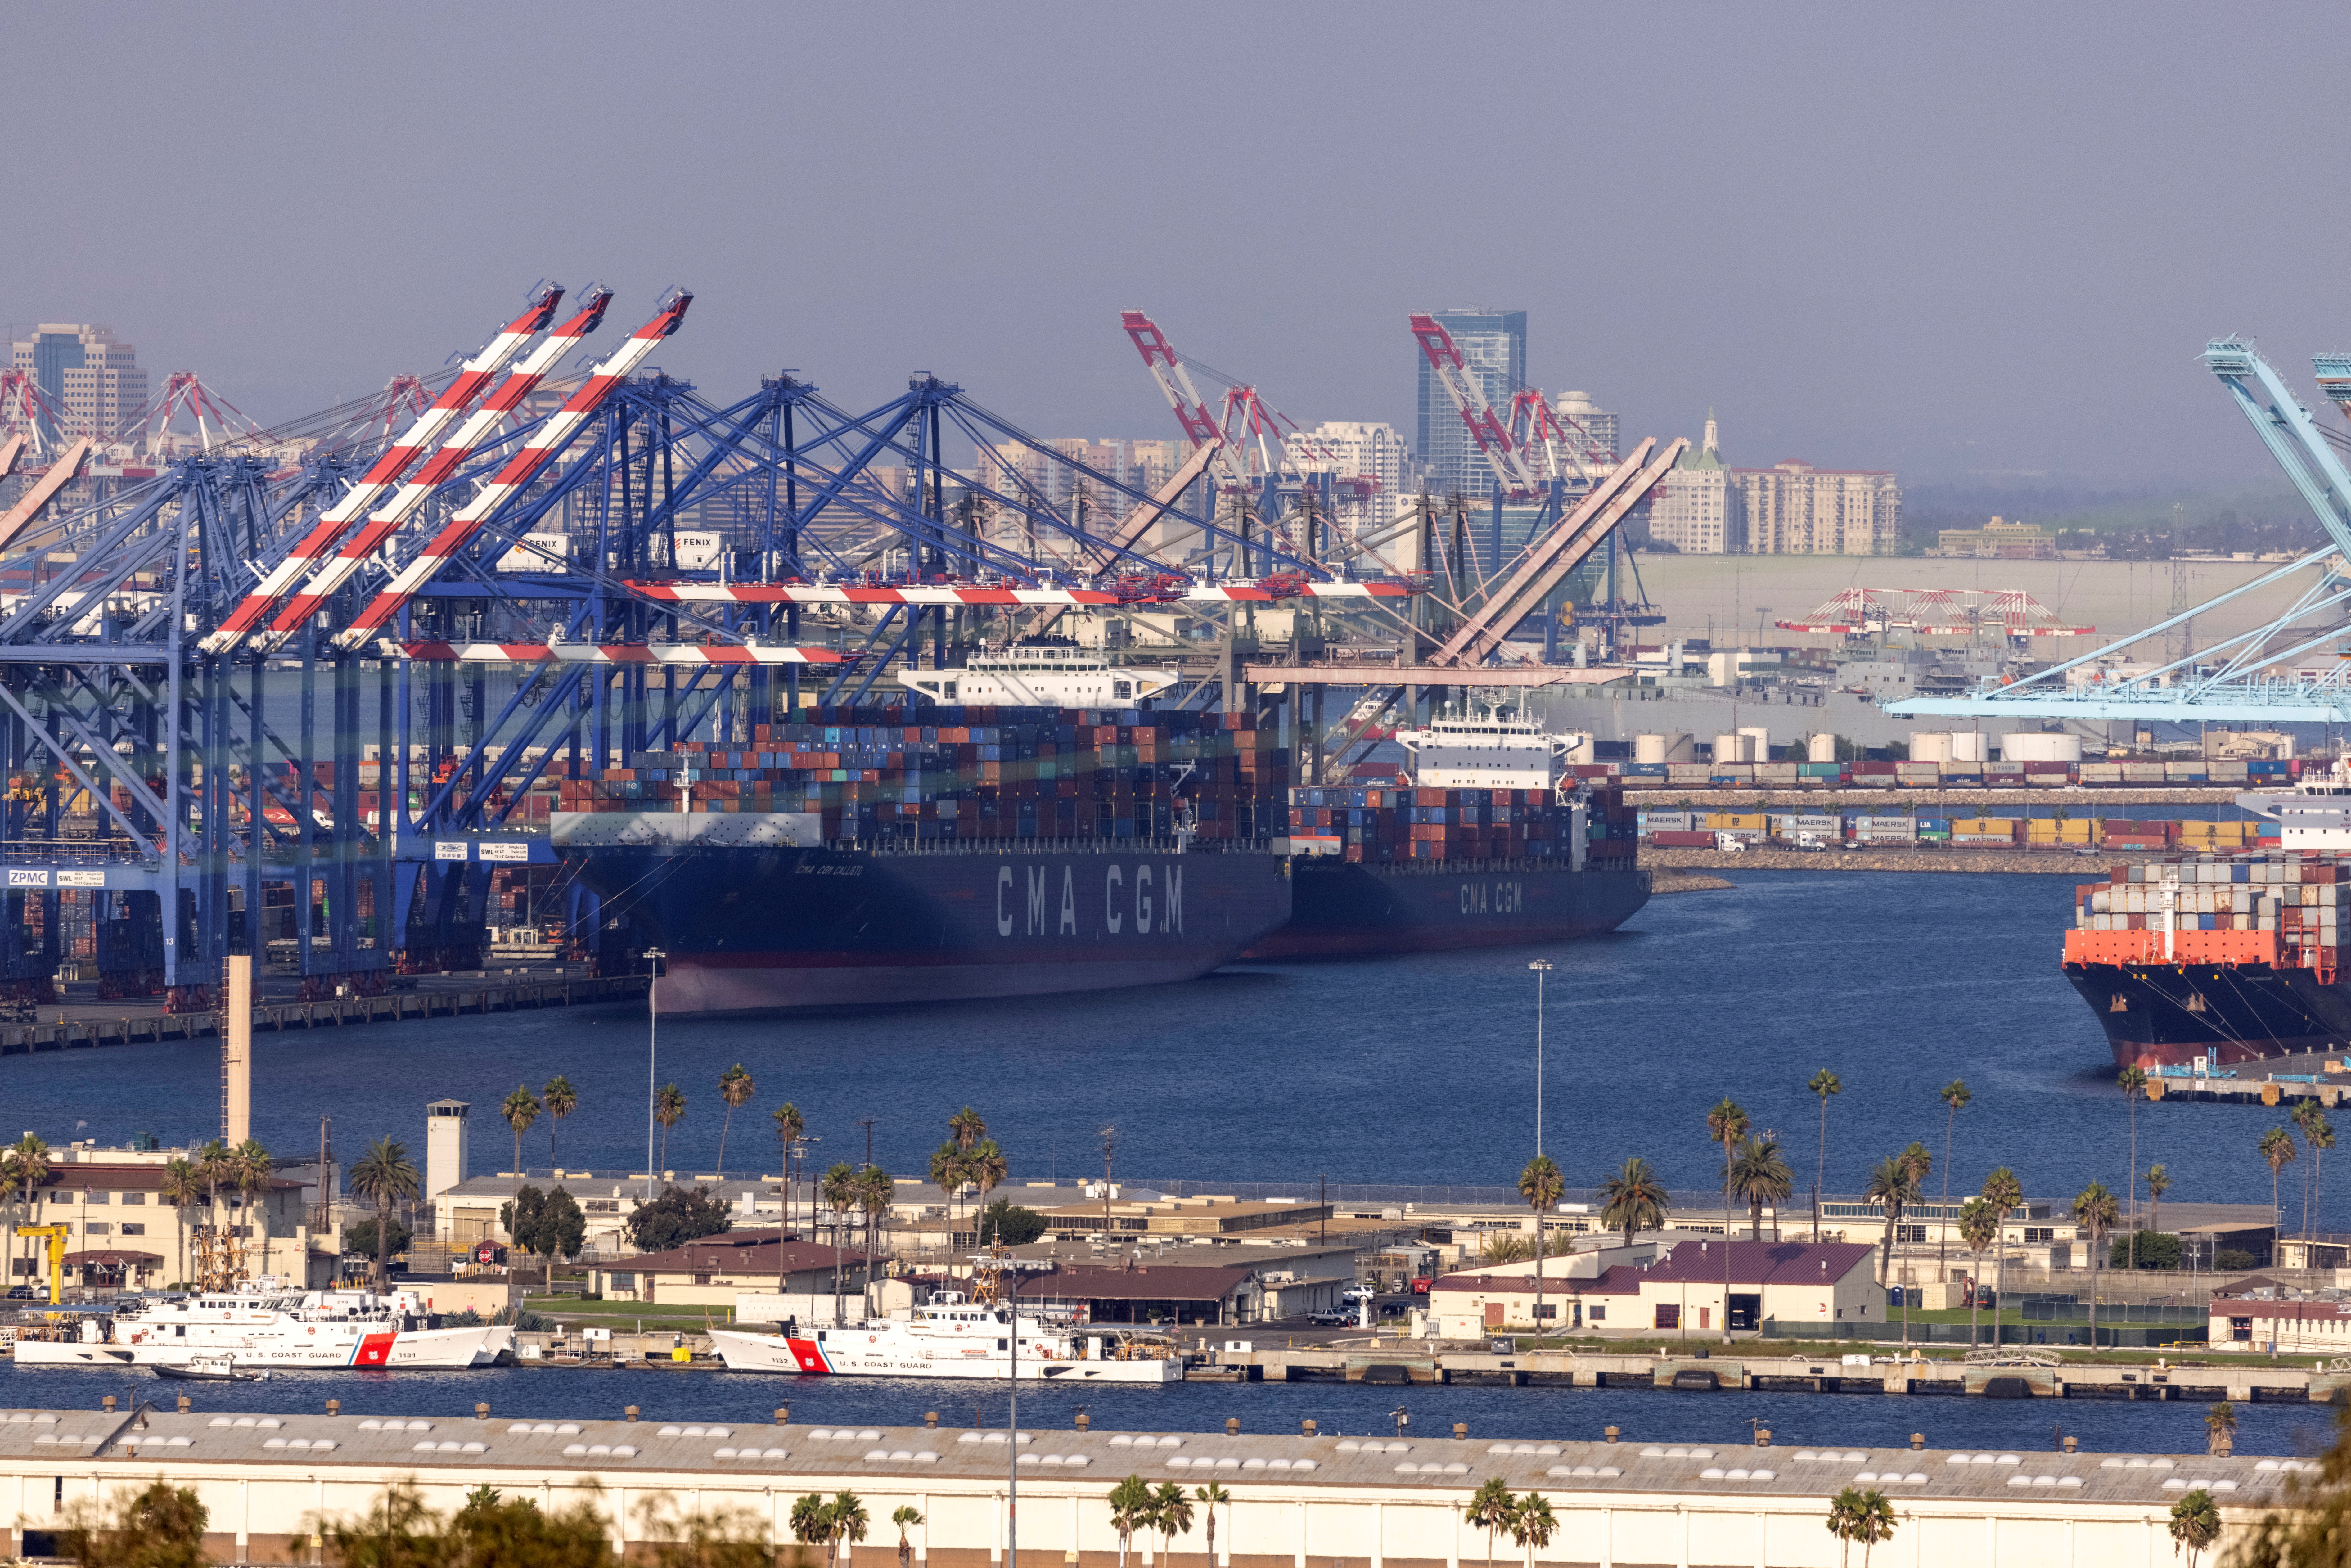 The congested Port of Los Angeles is shown in San Pedro, California